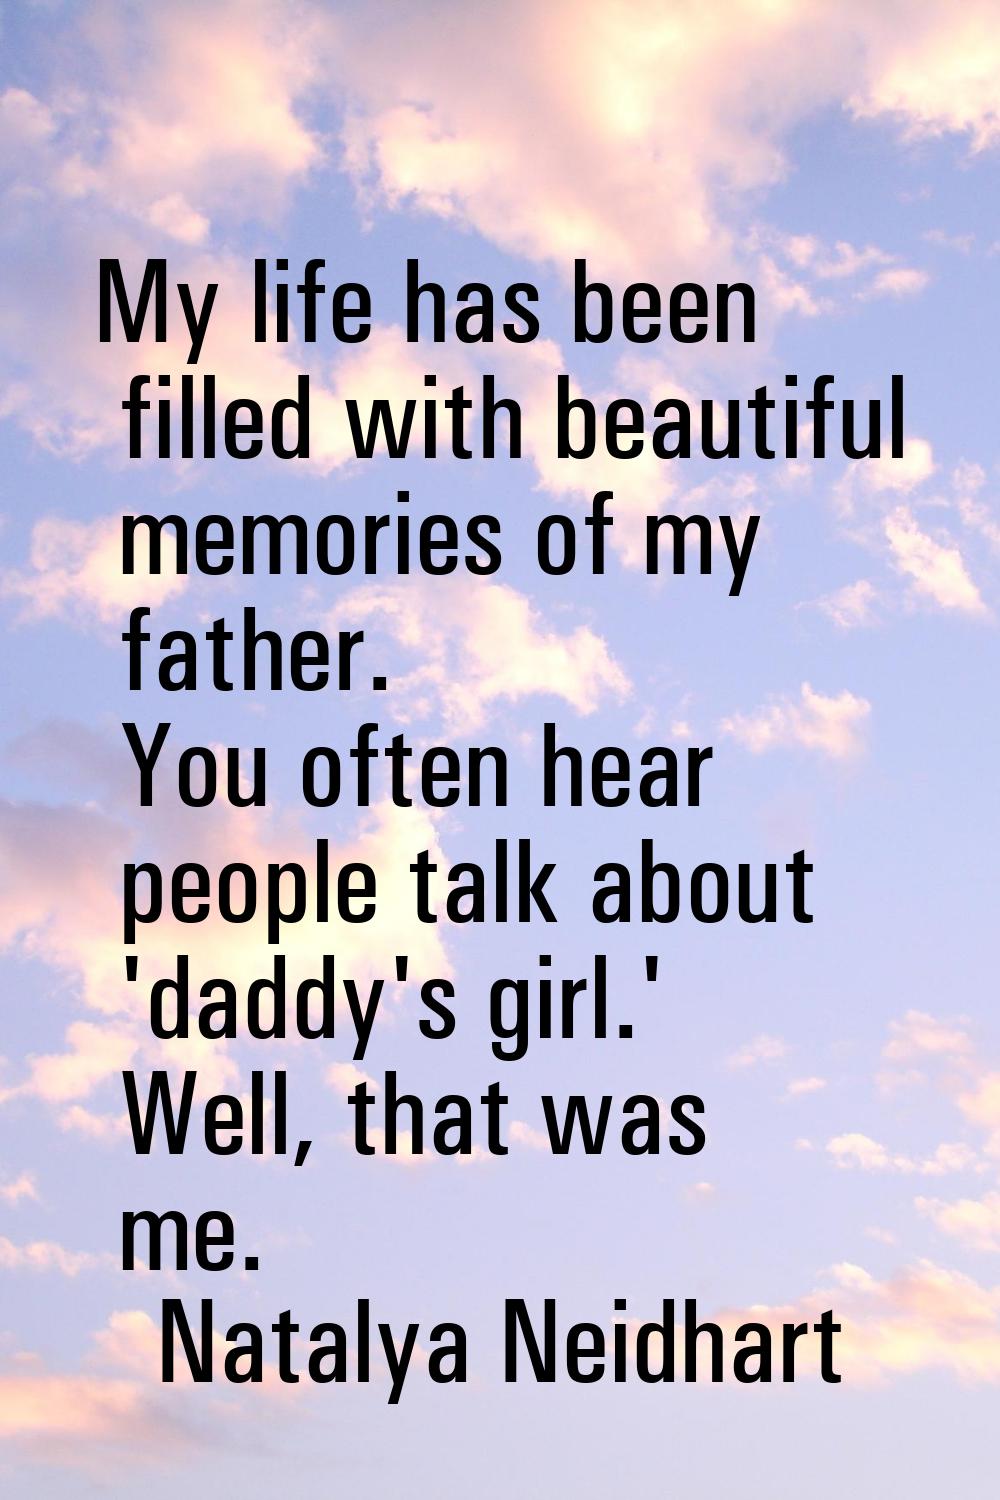 My life has been filled with beautiful memories of my father. You often hear people talk about 'dad